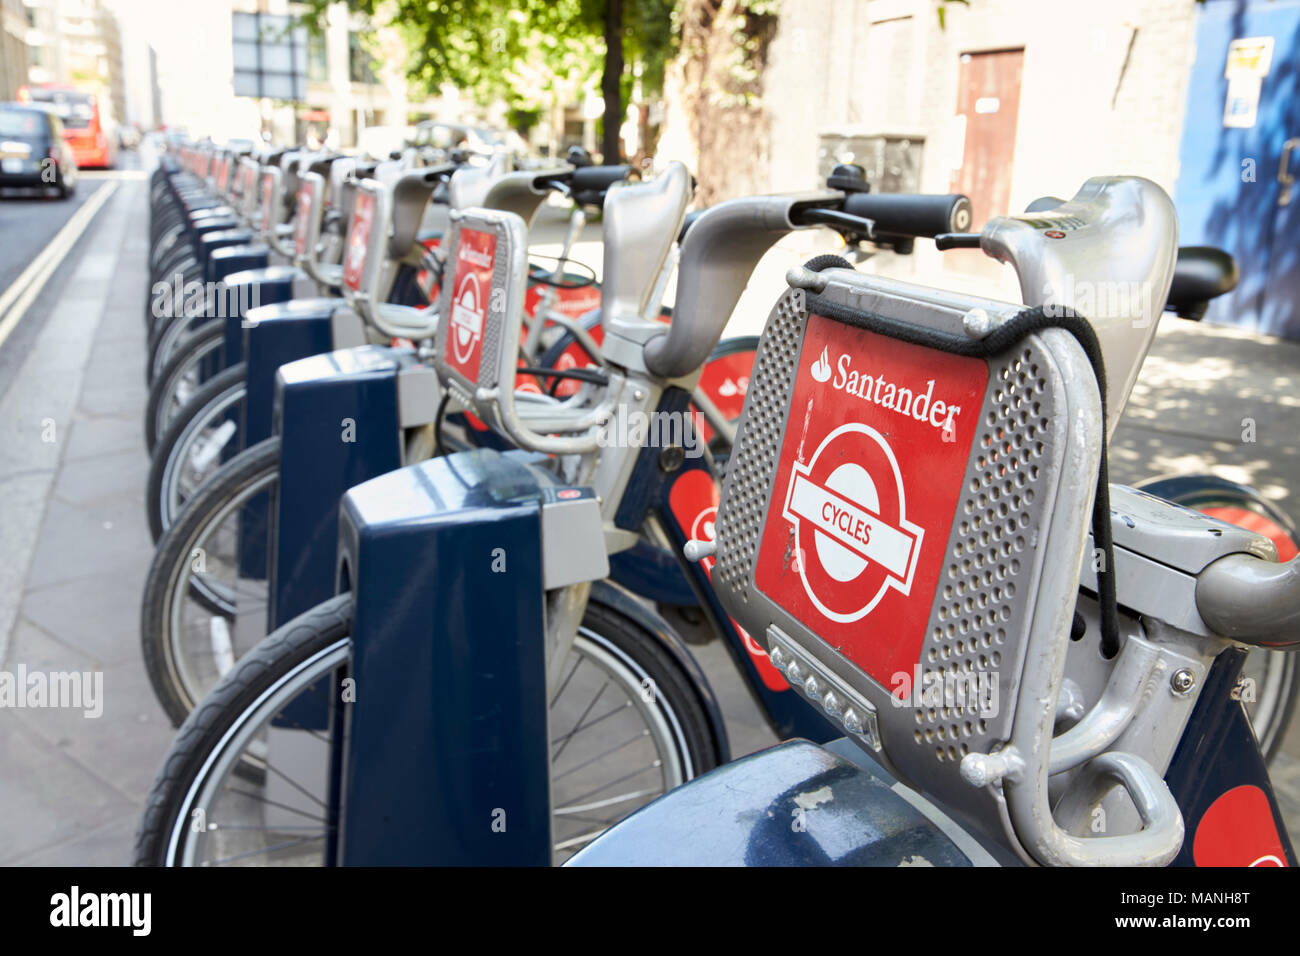 LONDON - MAY, 2017: A row of city bikes, available for hire in the City of London, detail Stock Photo